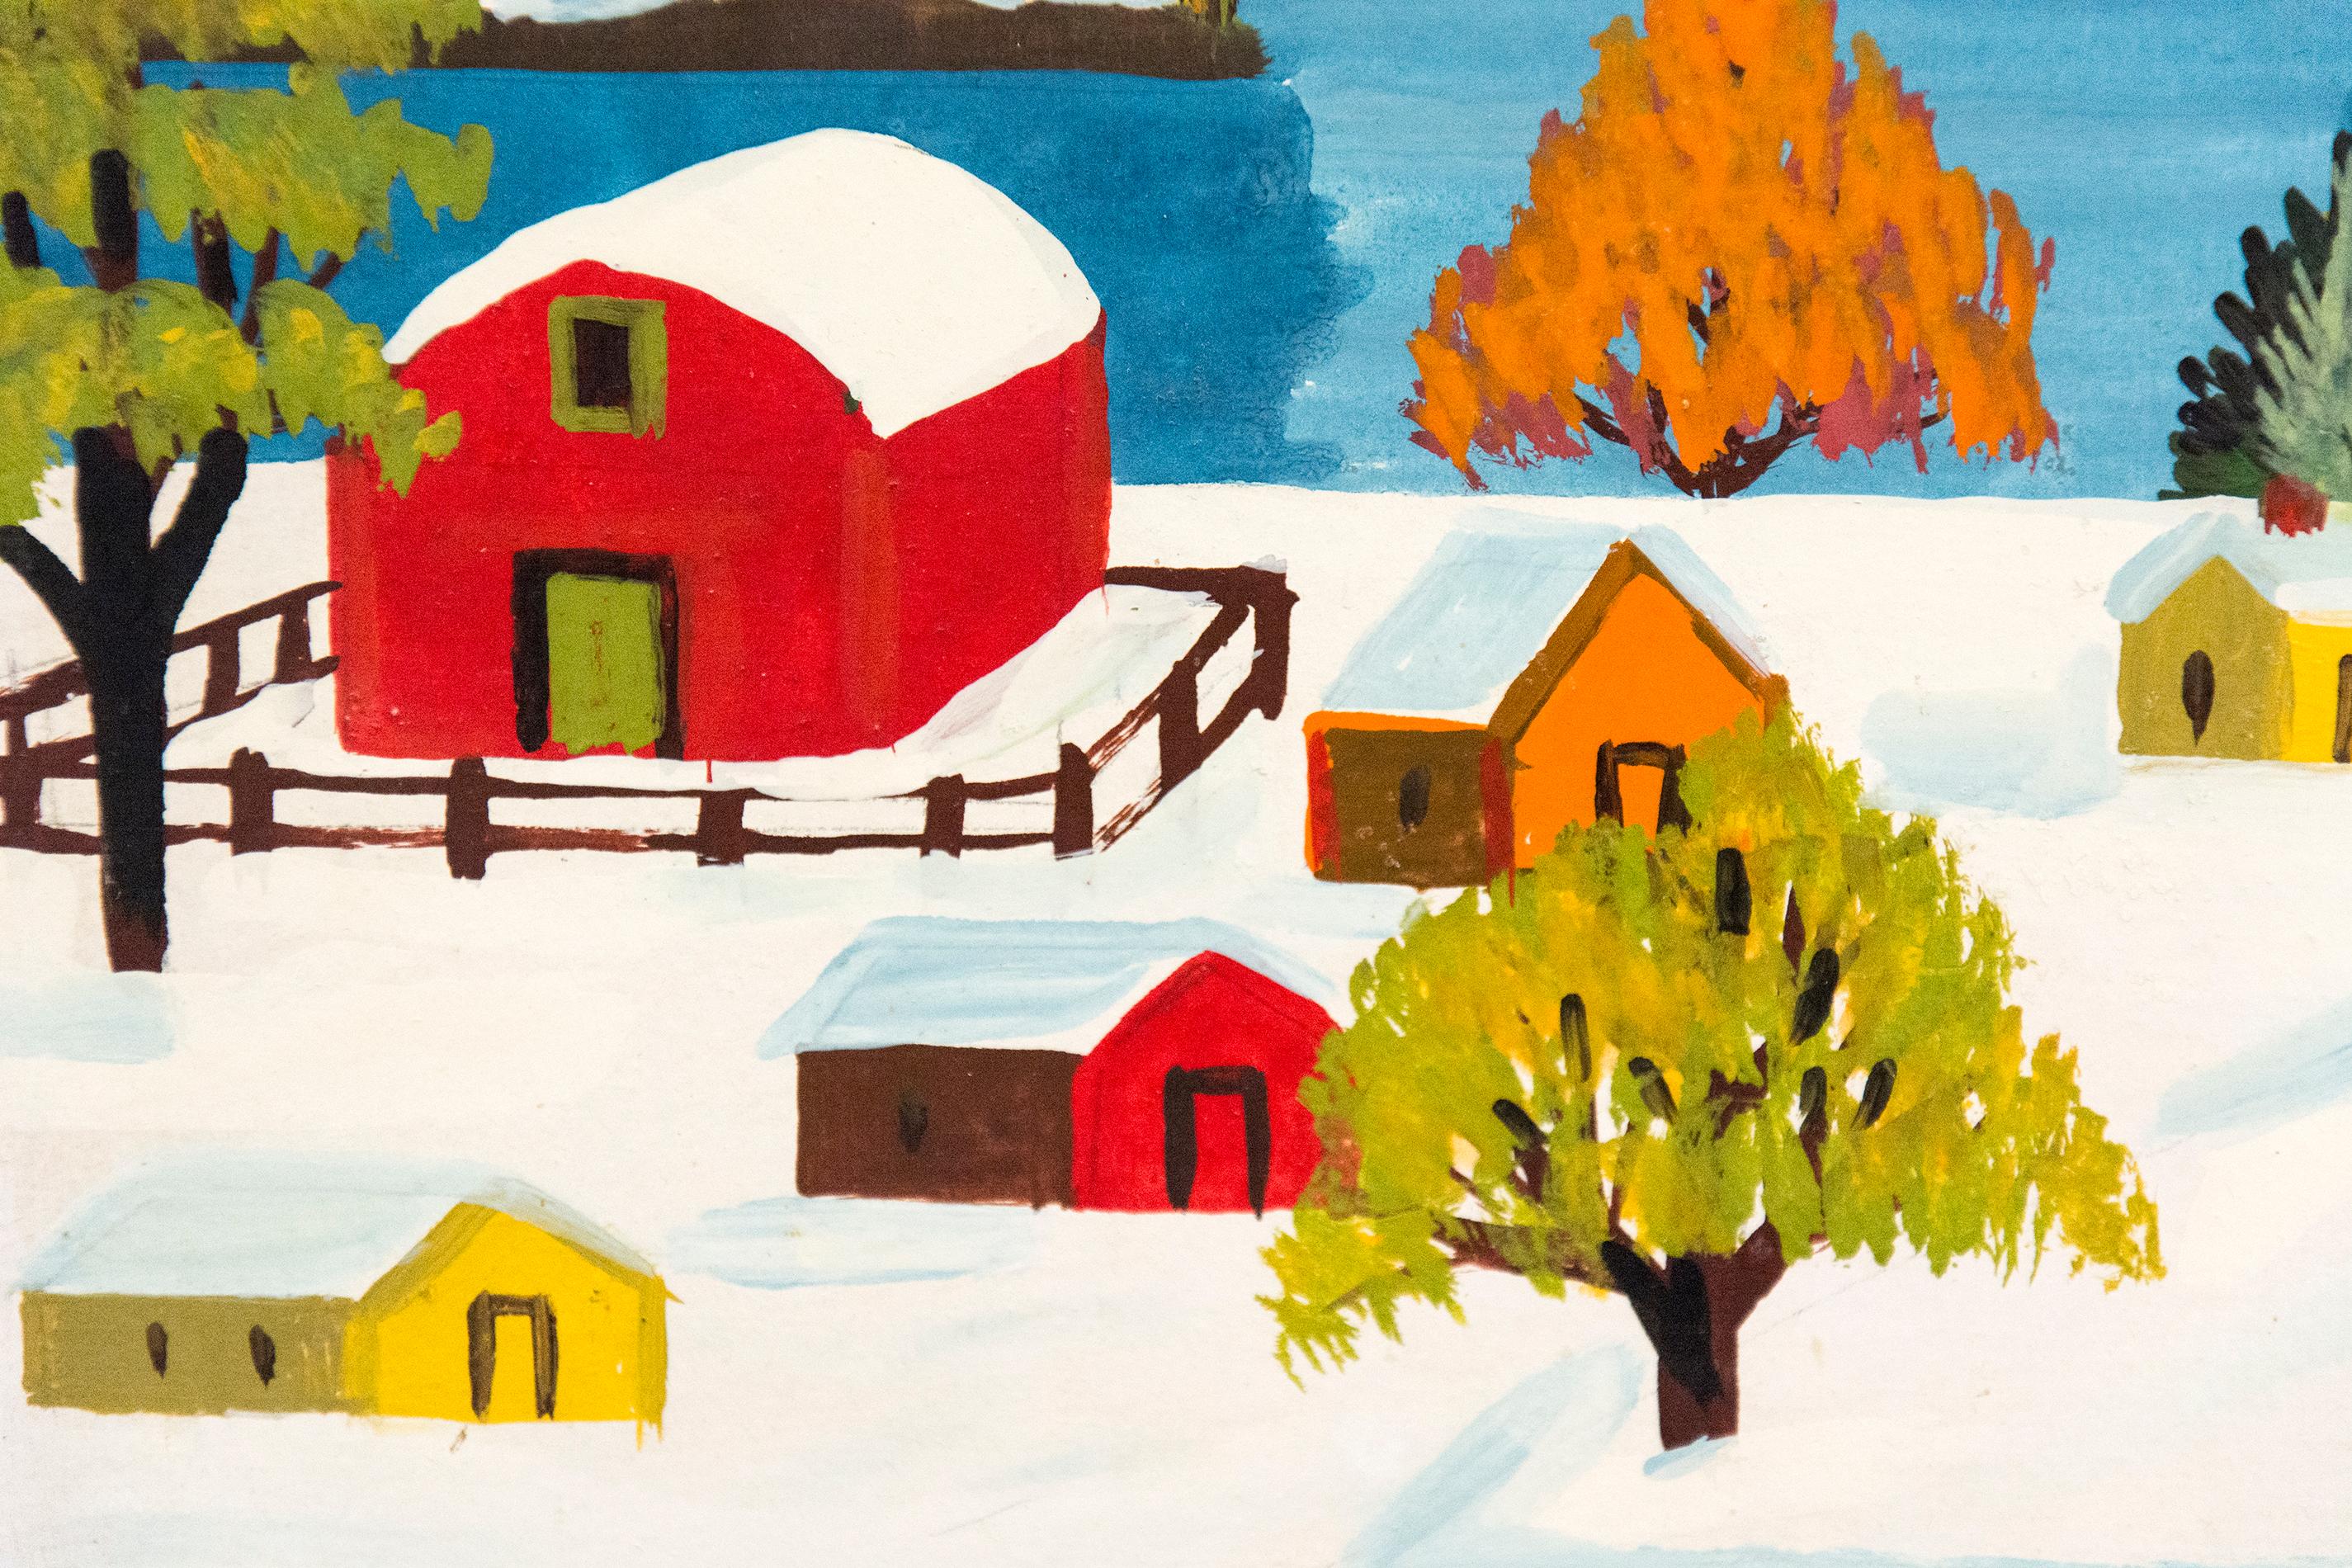 Two Skiers - Folk Art Painting by Maud Lewis